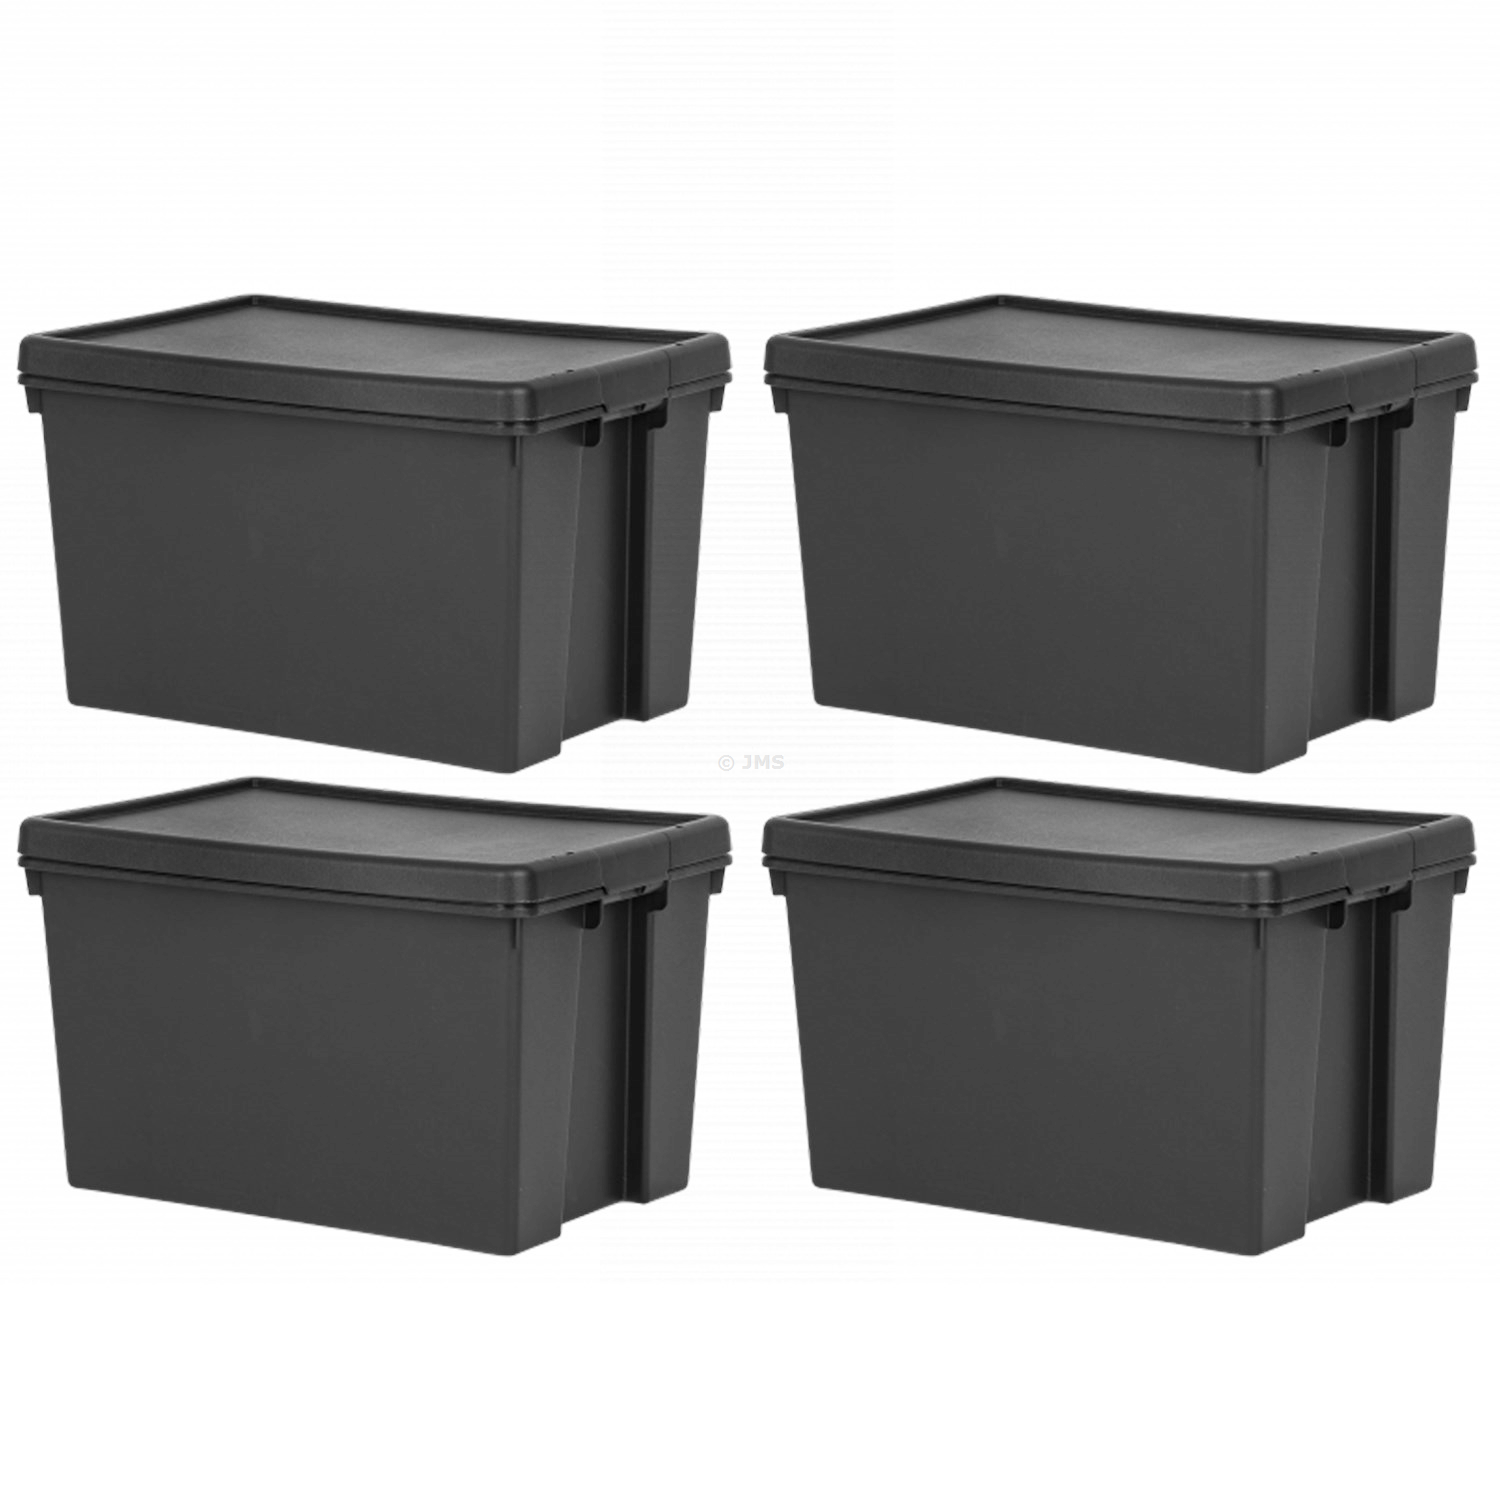 [Set of 4] Heavy Duty 62L Black Storage Box with Lid Recycled Plastic Large Stackable Nestable Containers Home Office Garage Toolbox